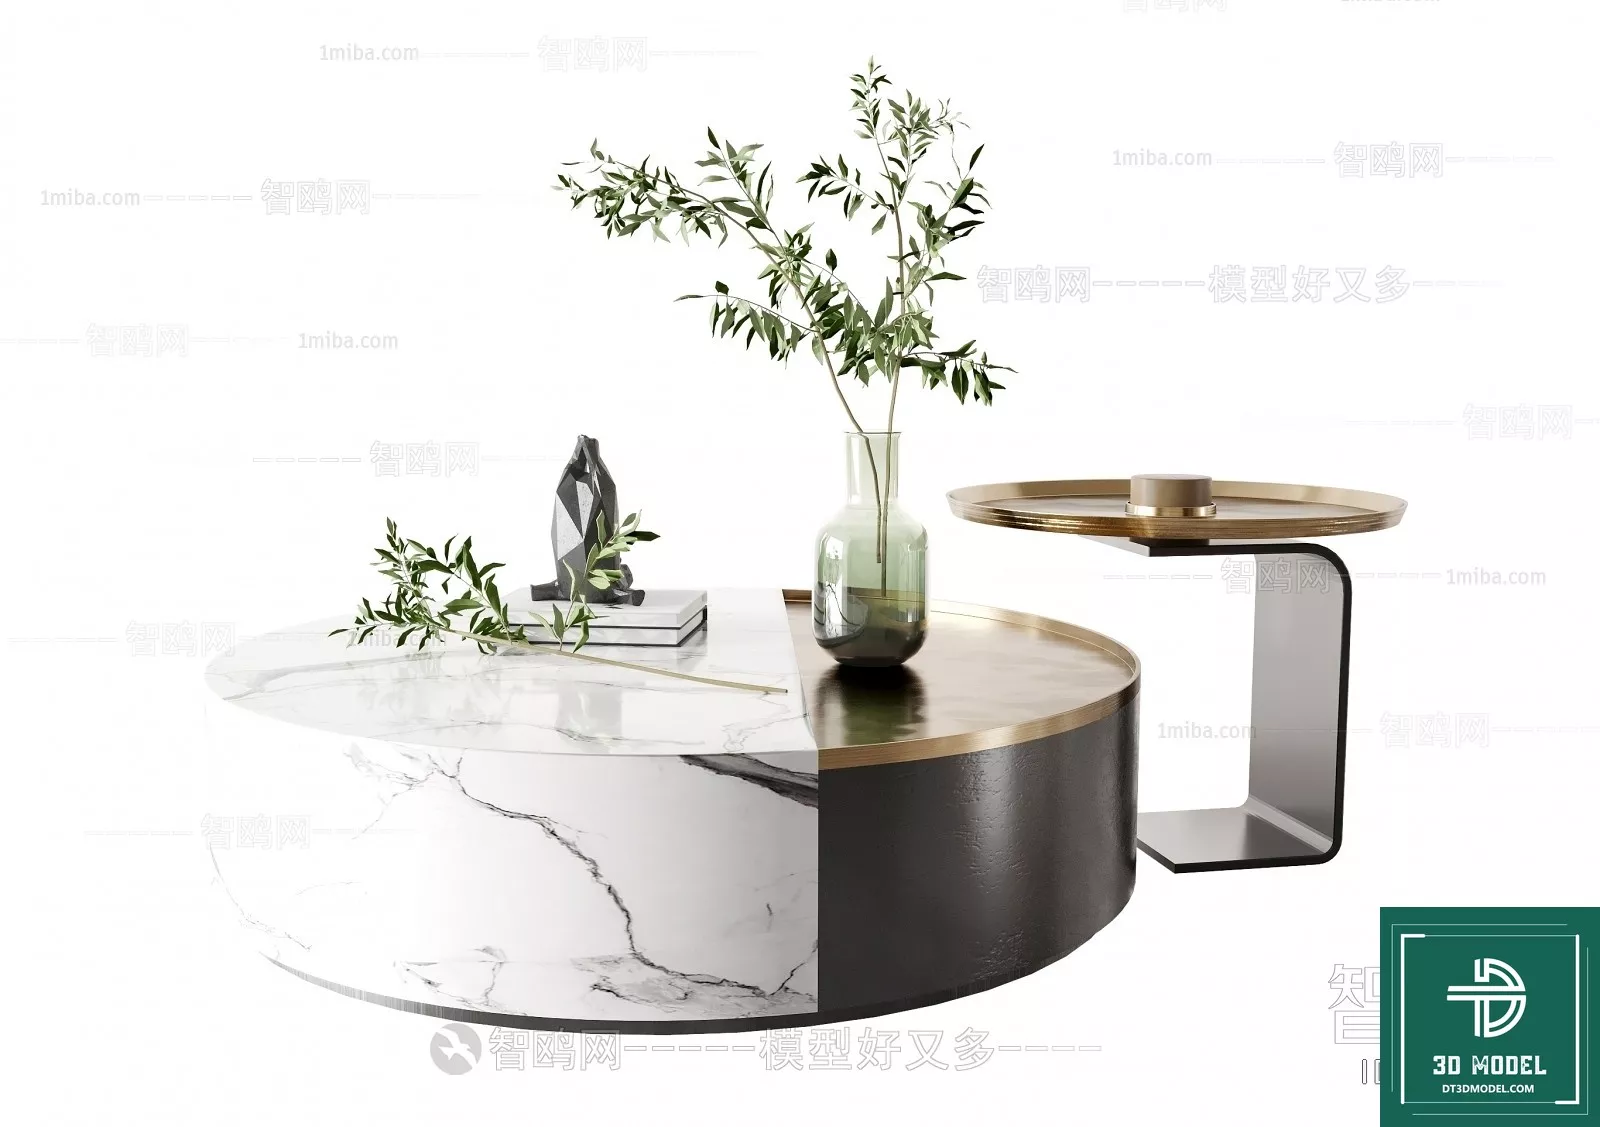 MODERN TEA TABLE - SKETCHUP 3D MODEL - VRAY OR ENSCAPE - ID14984